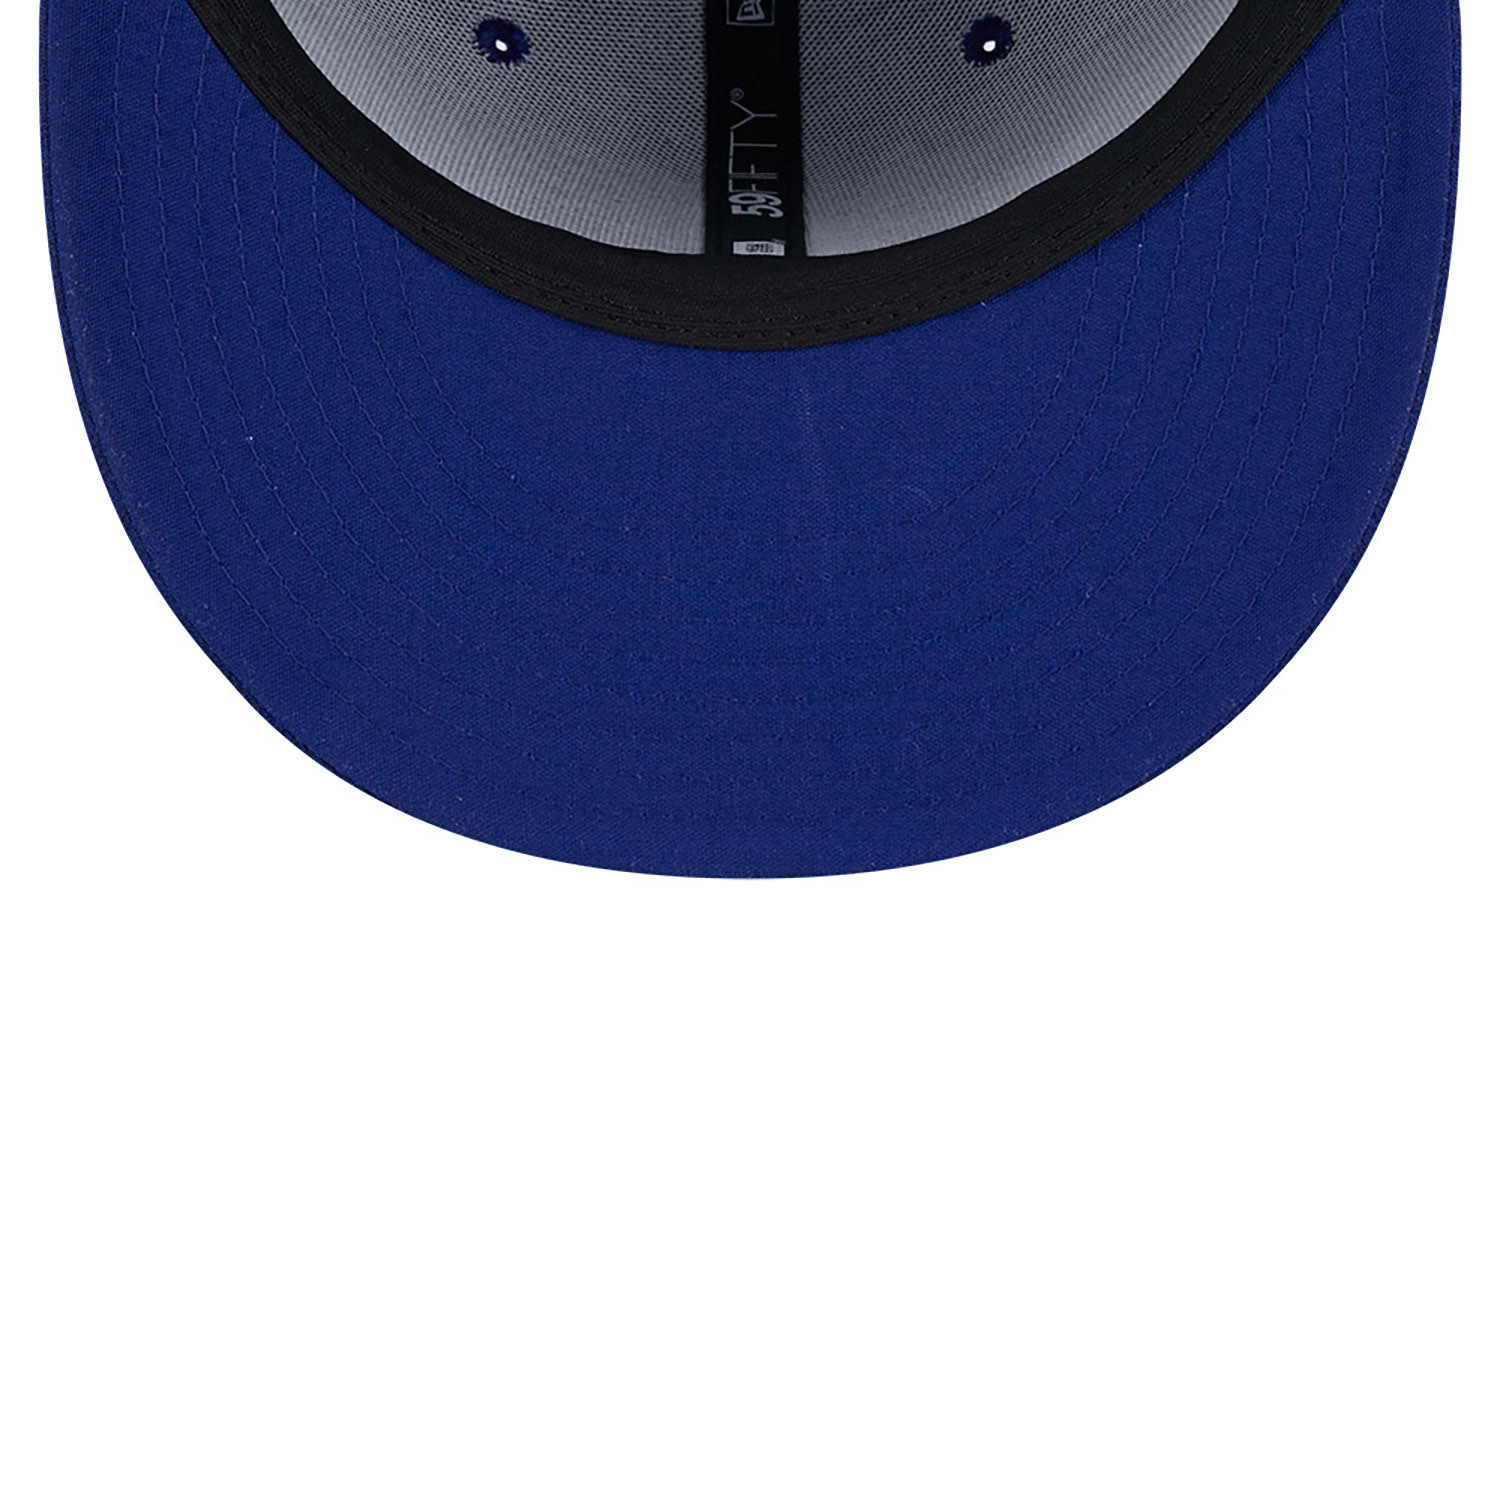 LA Dodgers Clubhouse Dark Blue 59FIFTY Fitted Cap